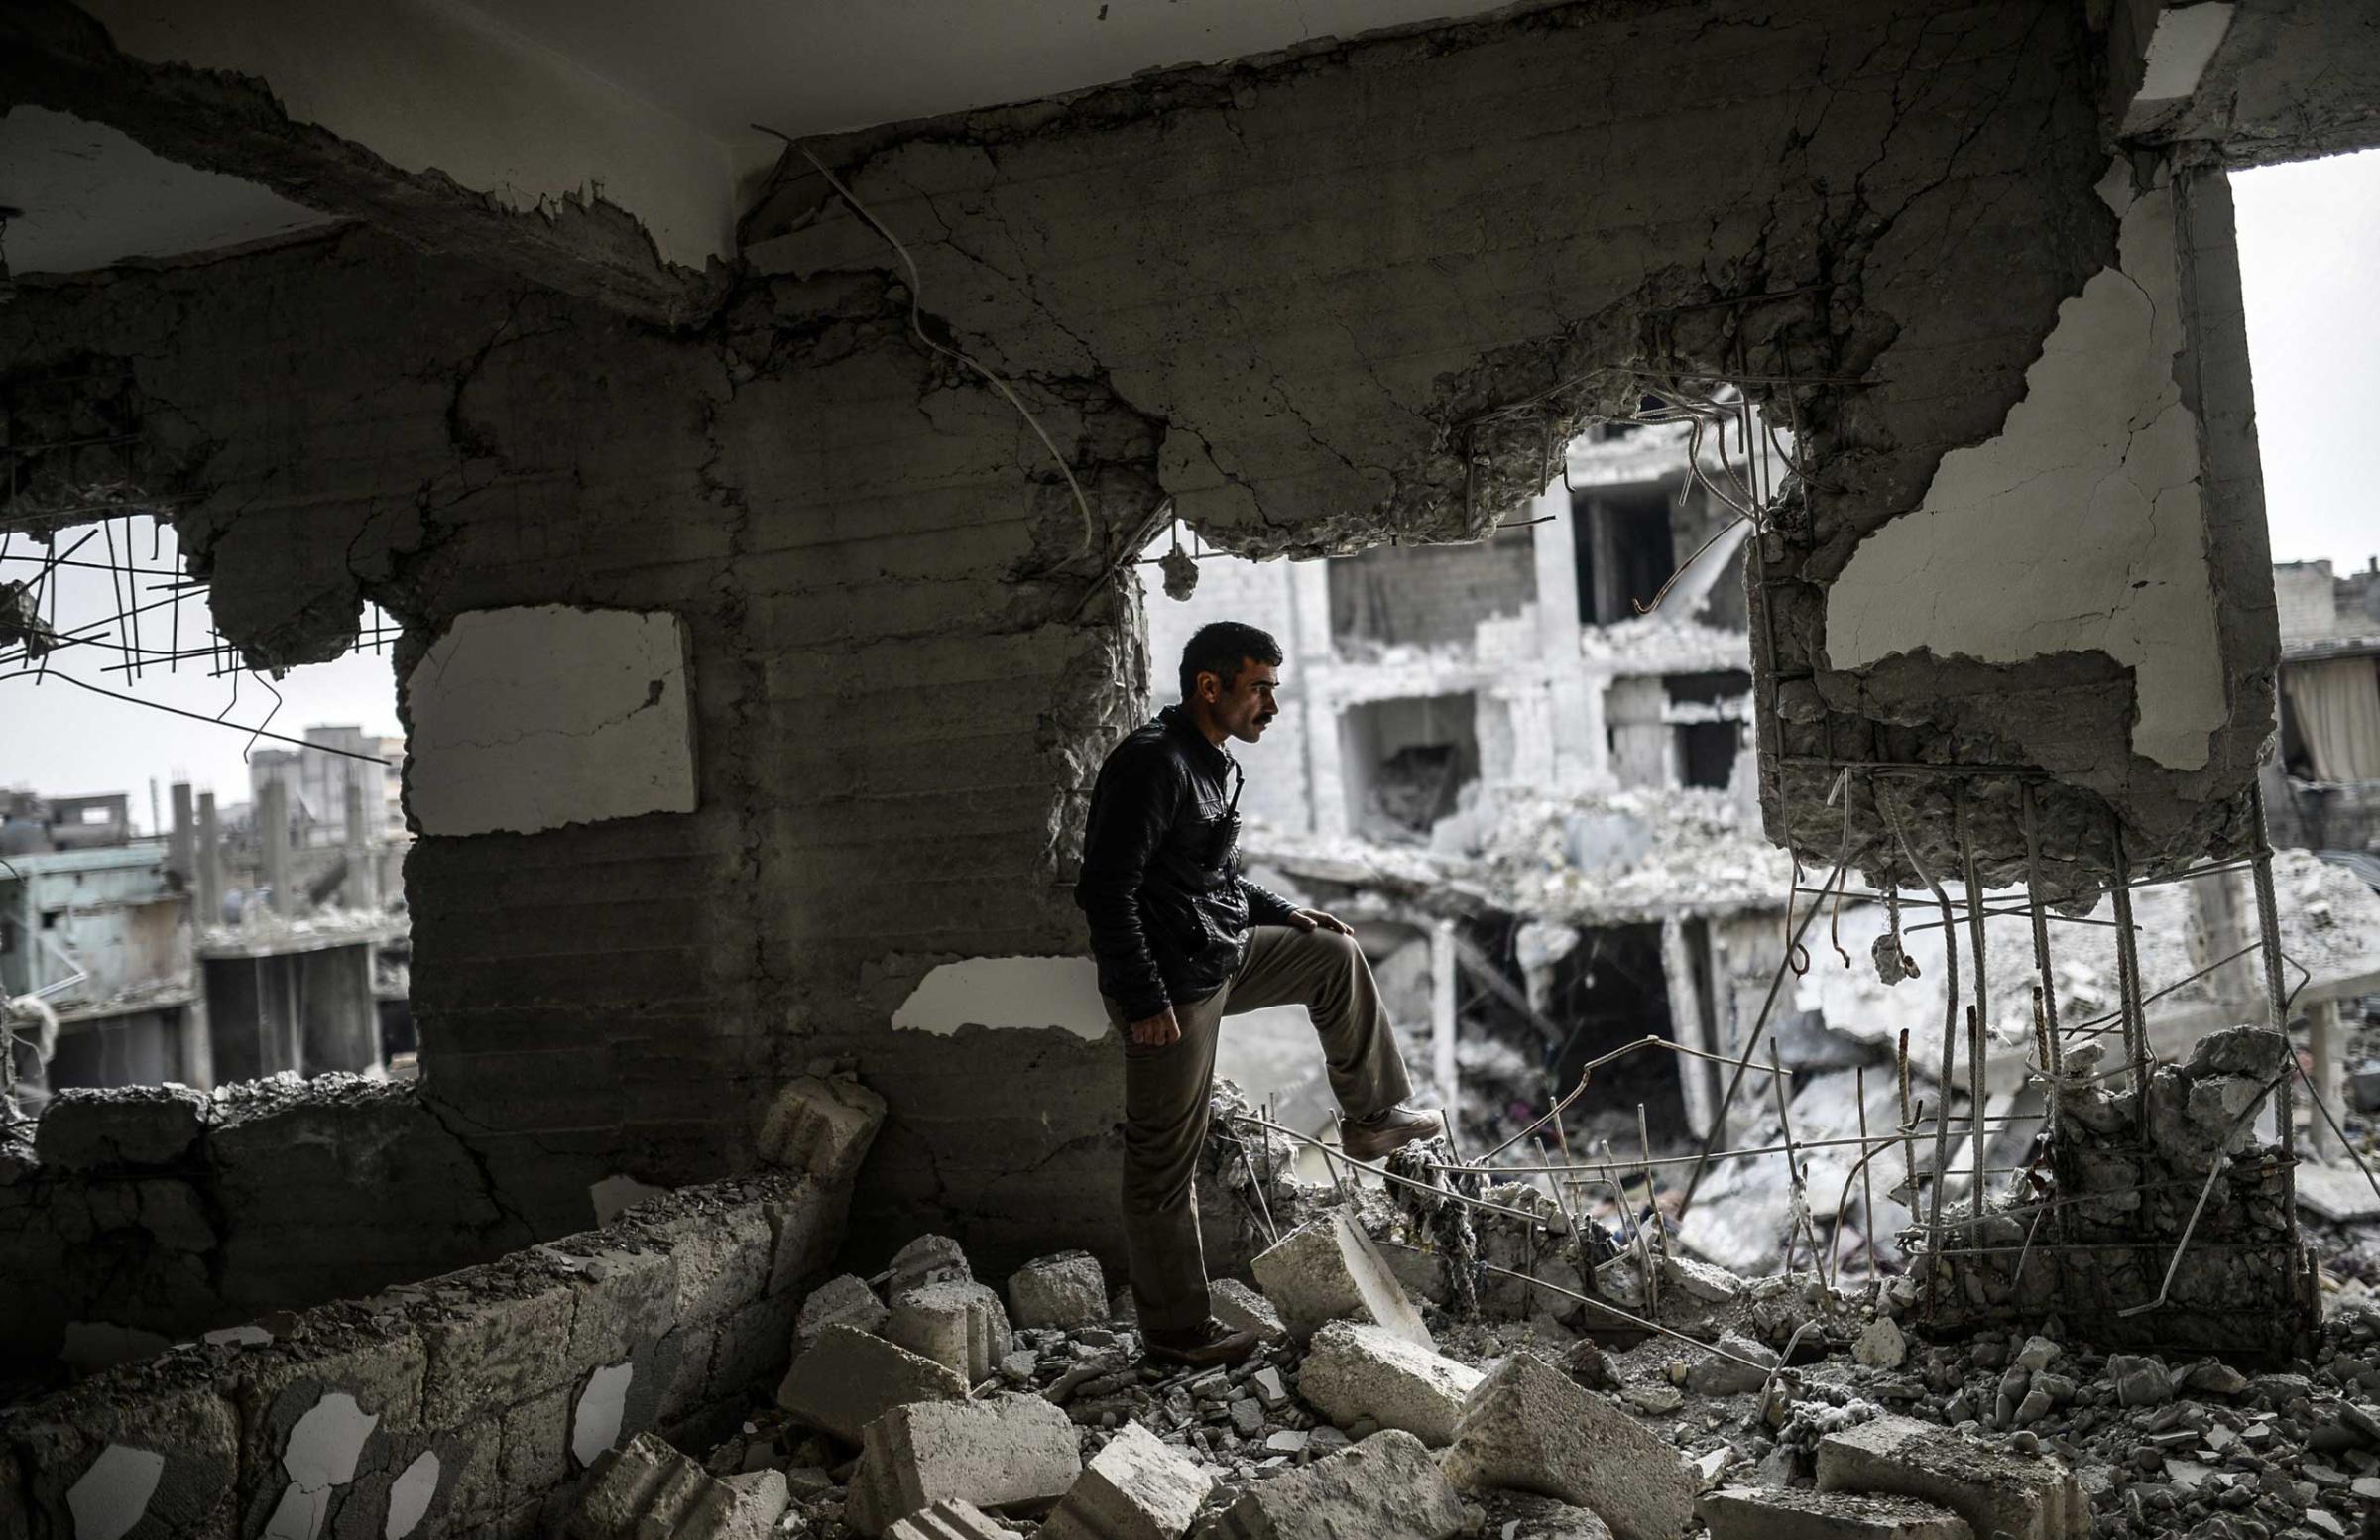 A Kurdish man stands in a destroyed building in the center of the Syrian border town of Kobani on Jan. 28, 2015.